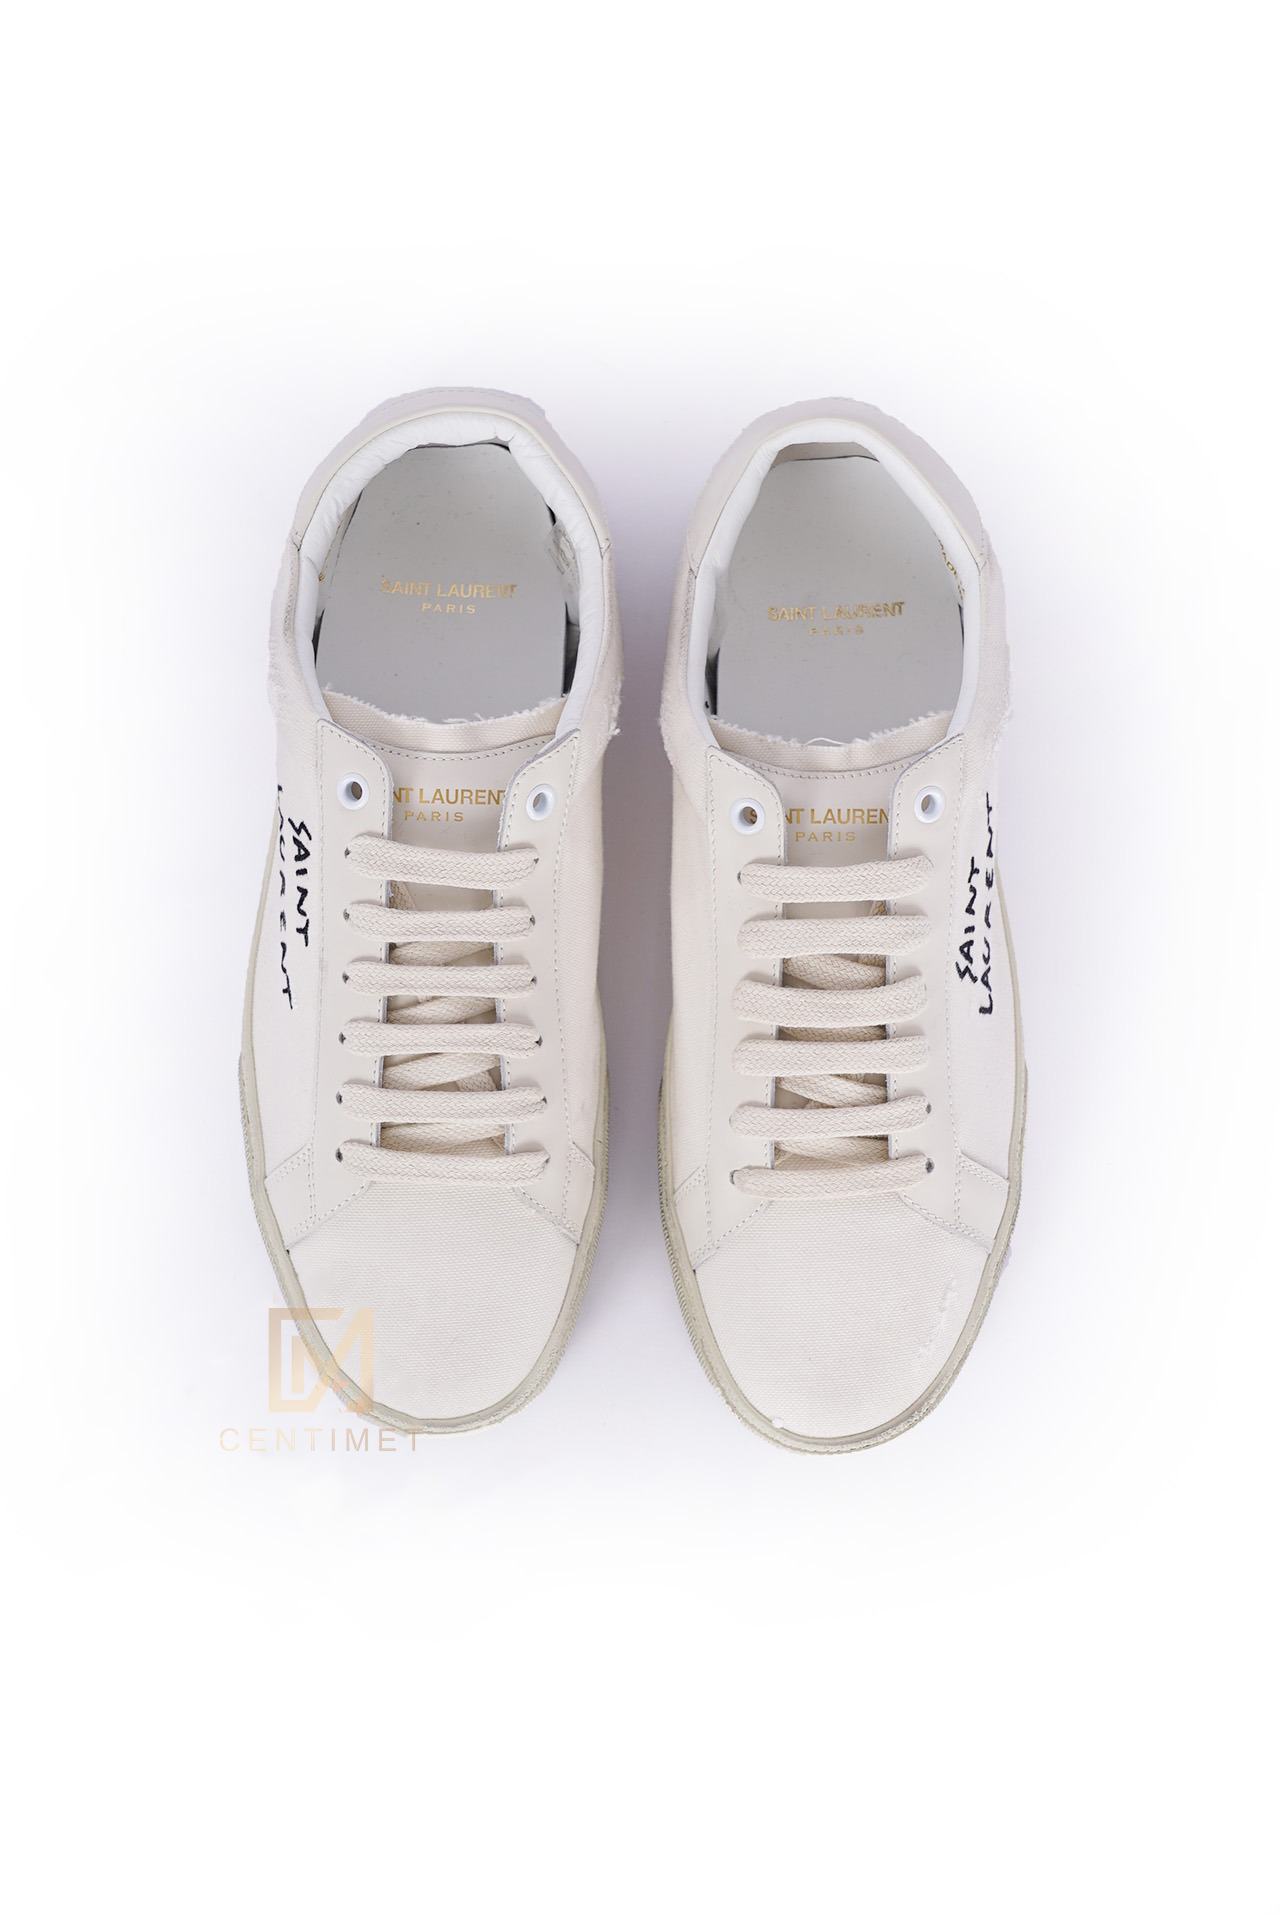 Giày-Saint-Laurent-classic-SL06-embroidered-canvas-sneakers-05